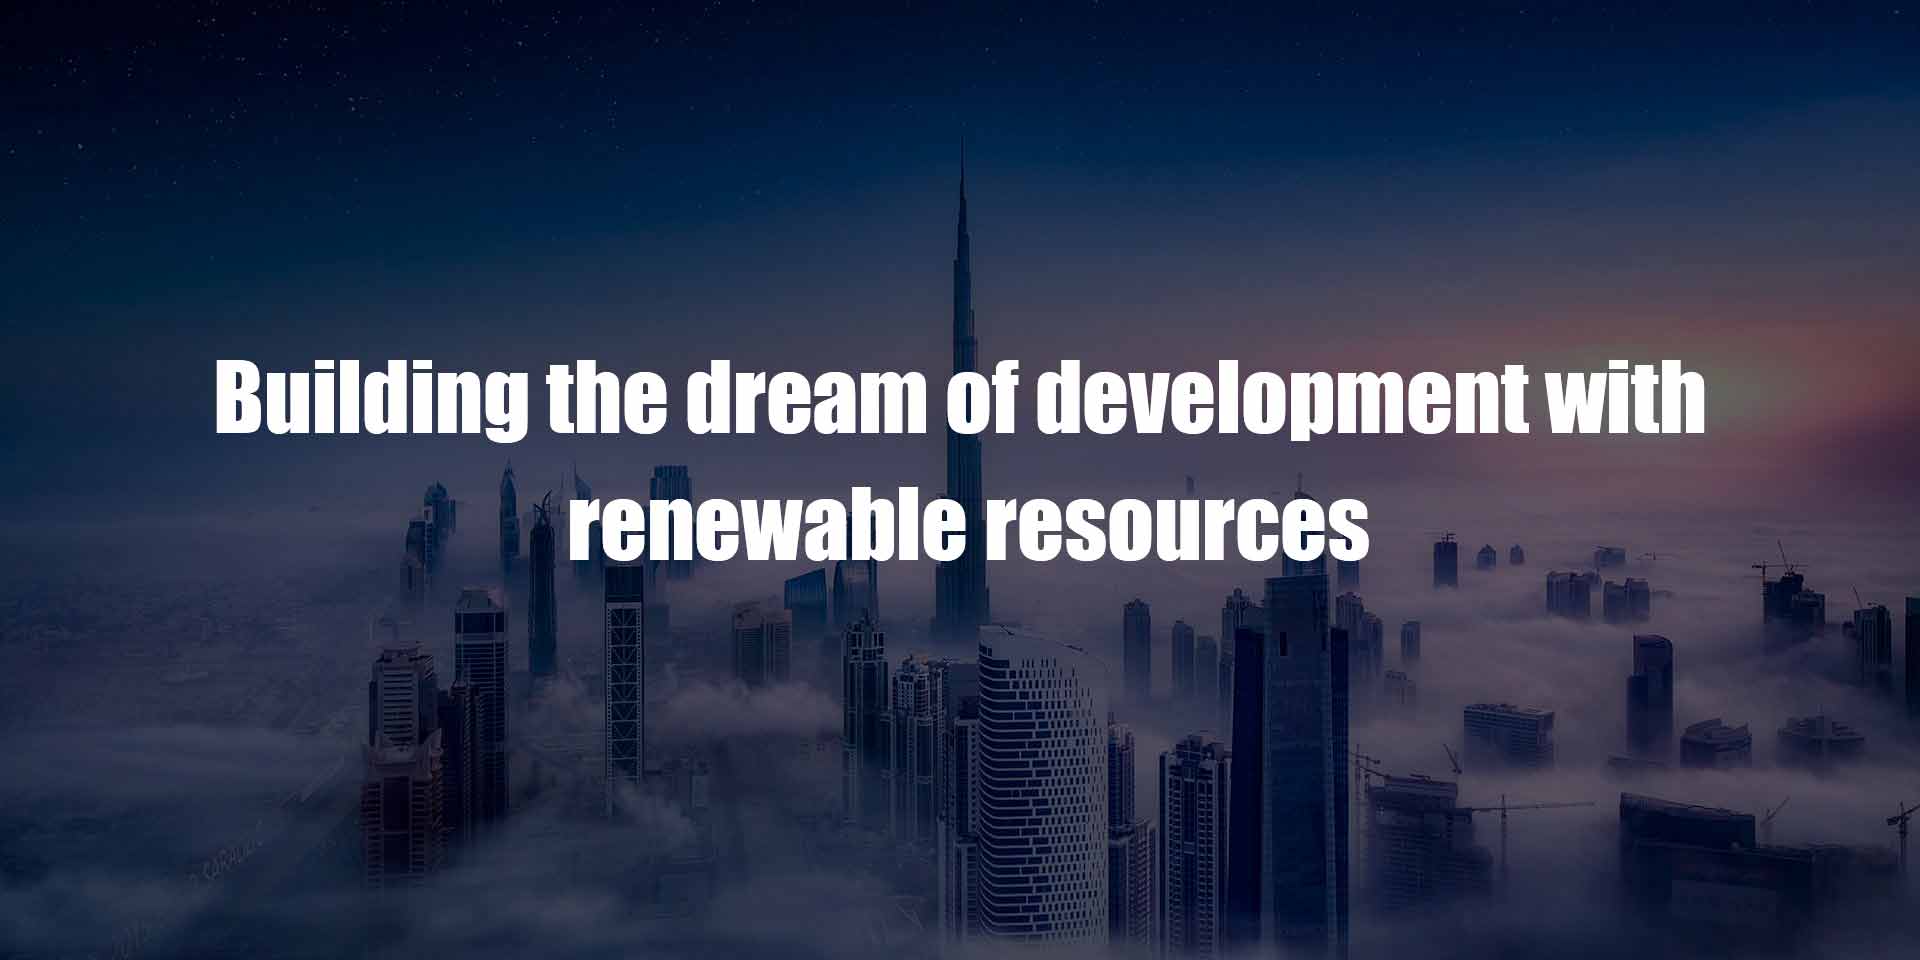 Building the dream of development with renewable resources